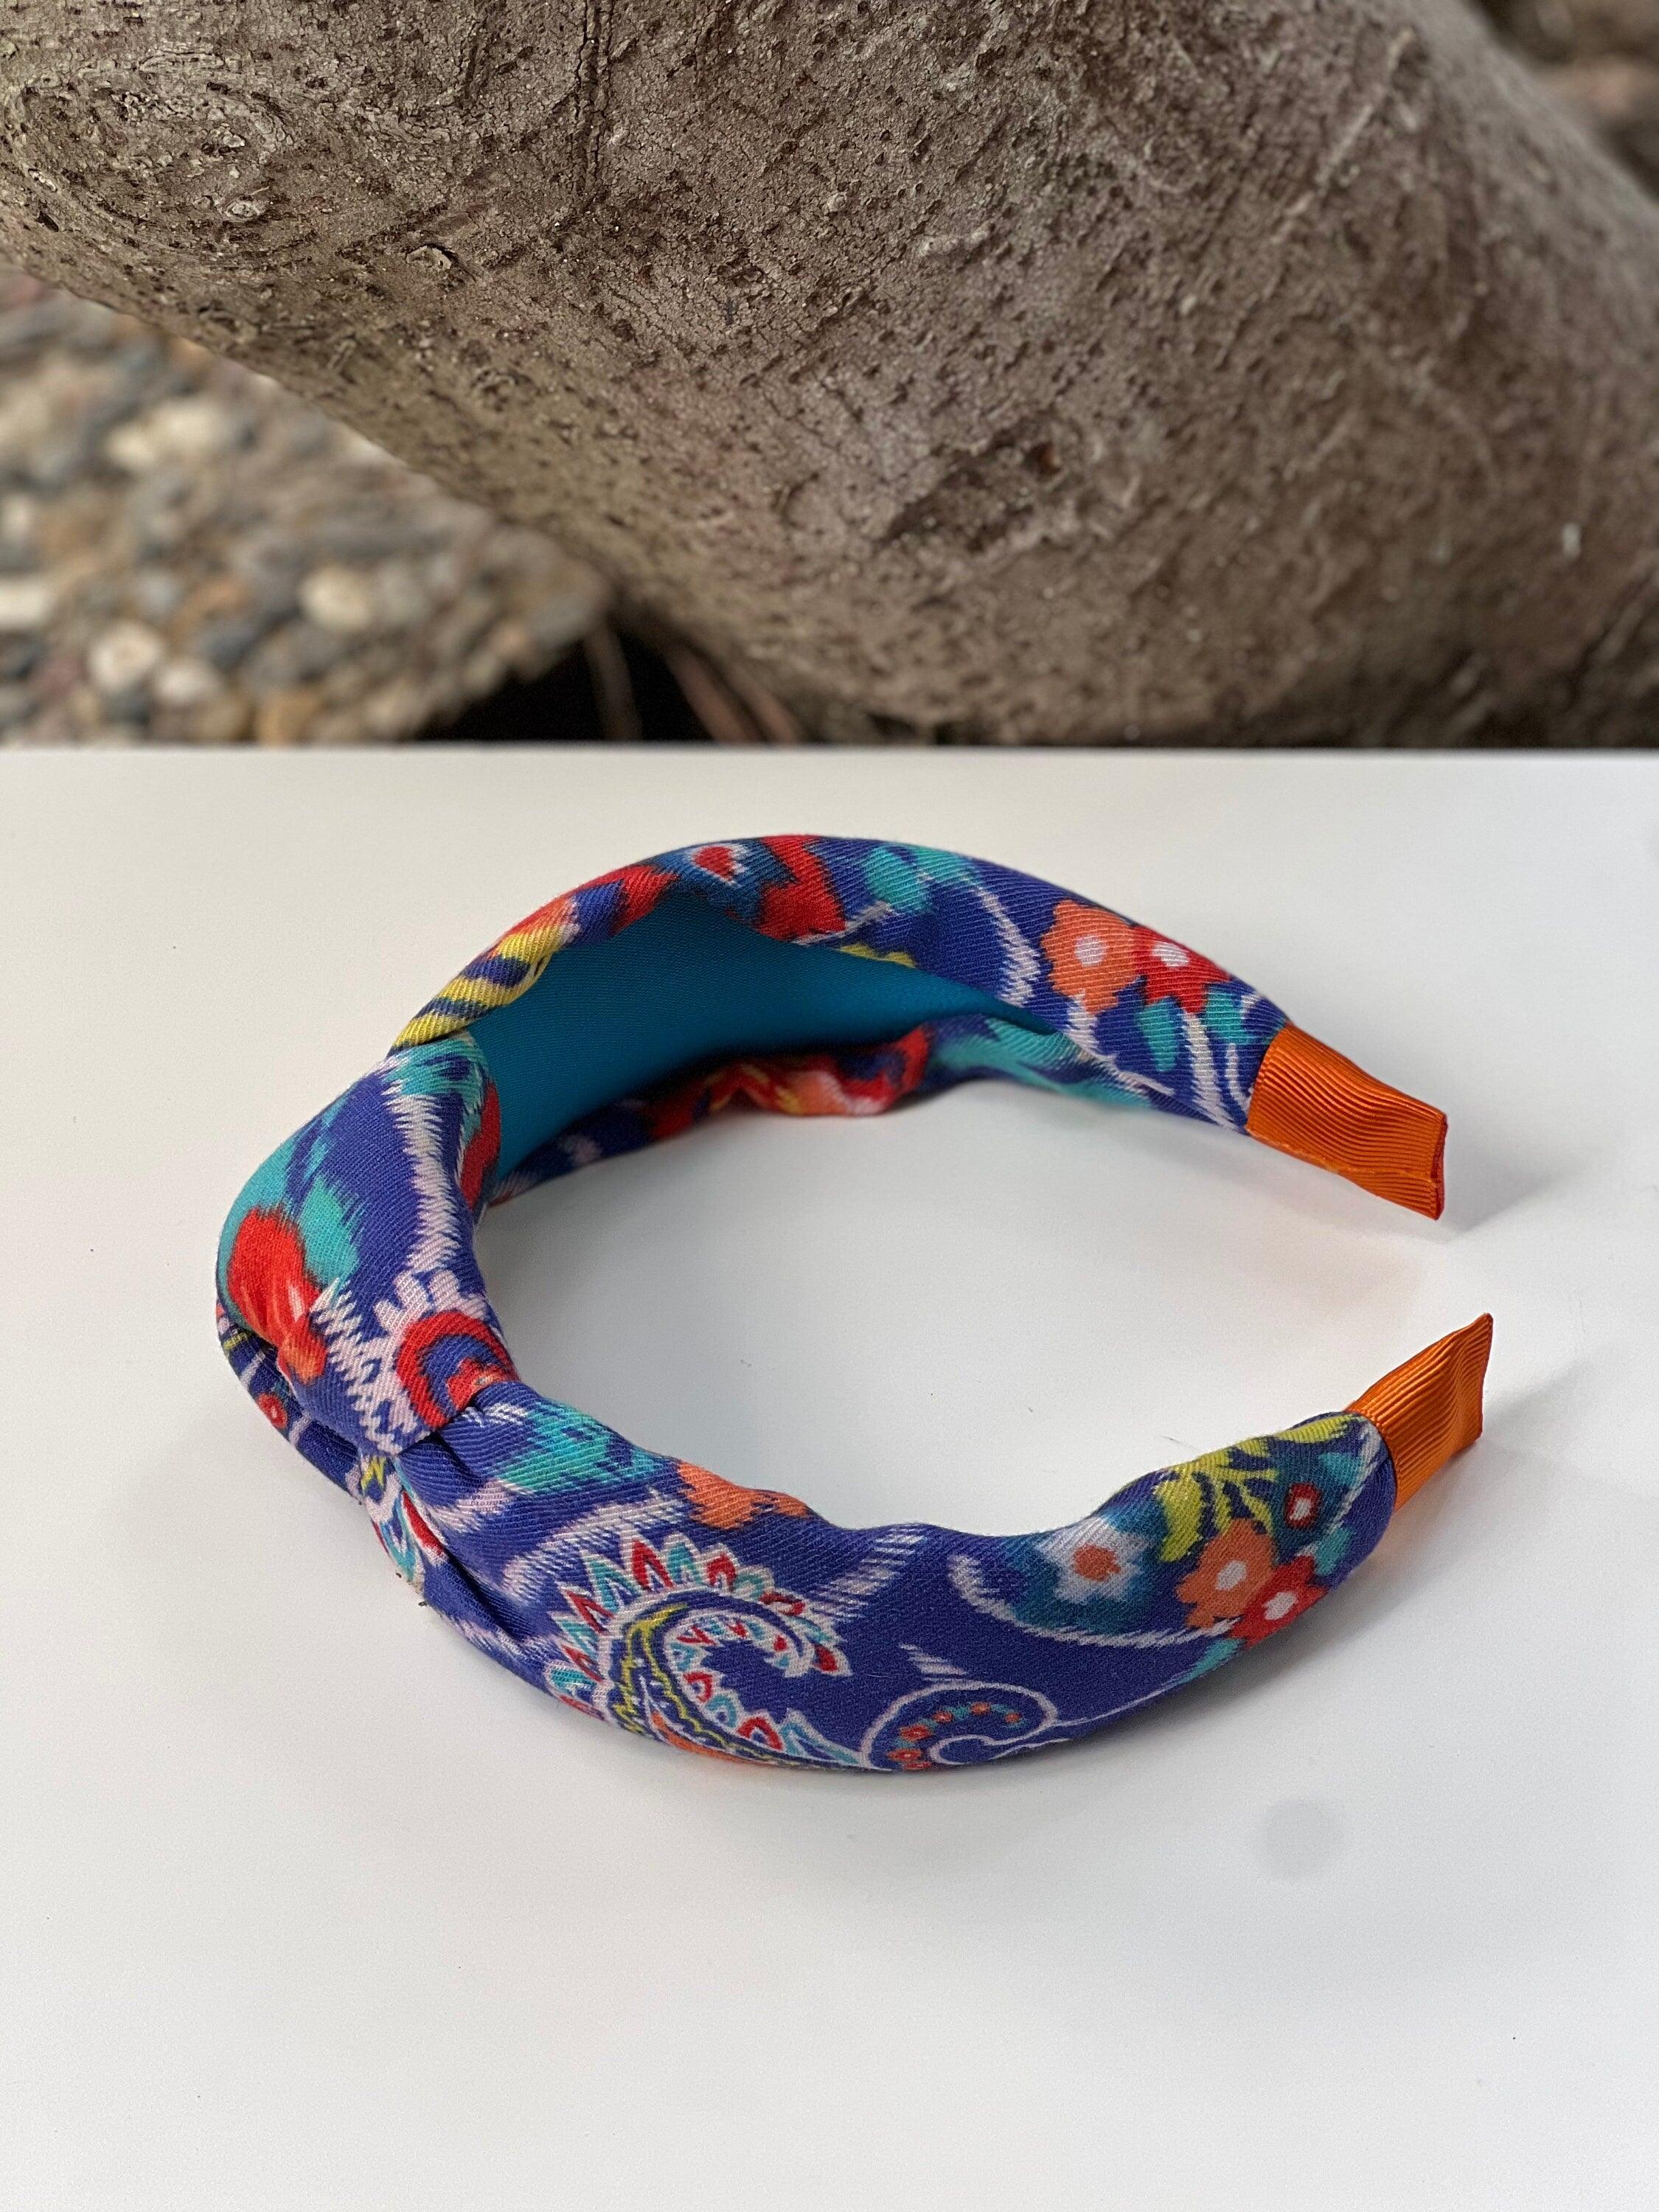 Stylish Ethnic Pattern Knotted Headband in Blue, Pink, and Yellow - Wide and Stylish Women's Hairband with Cotton Padding available at Moyoni Design